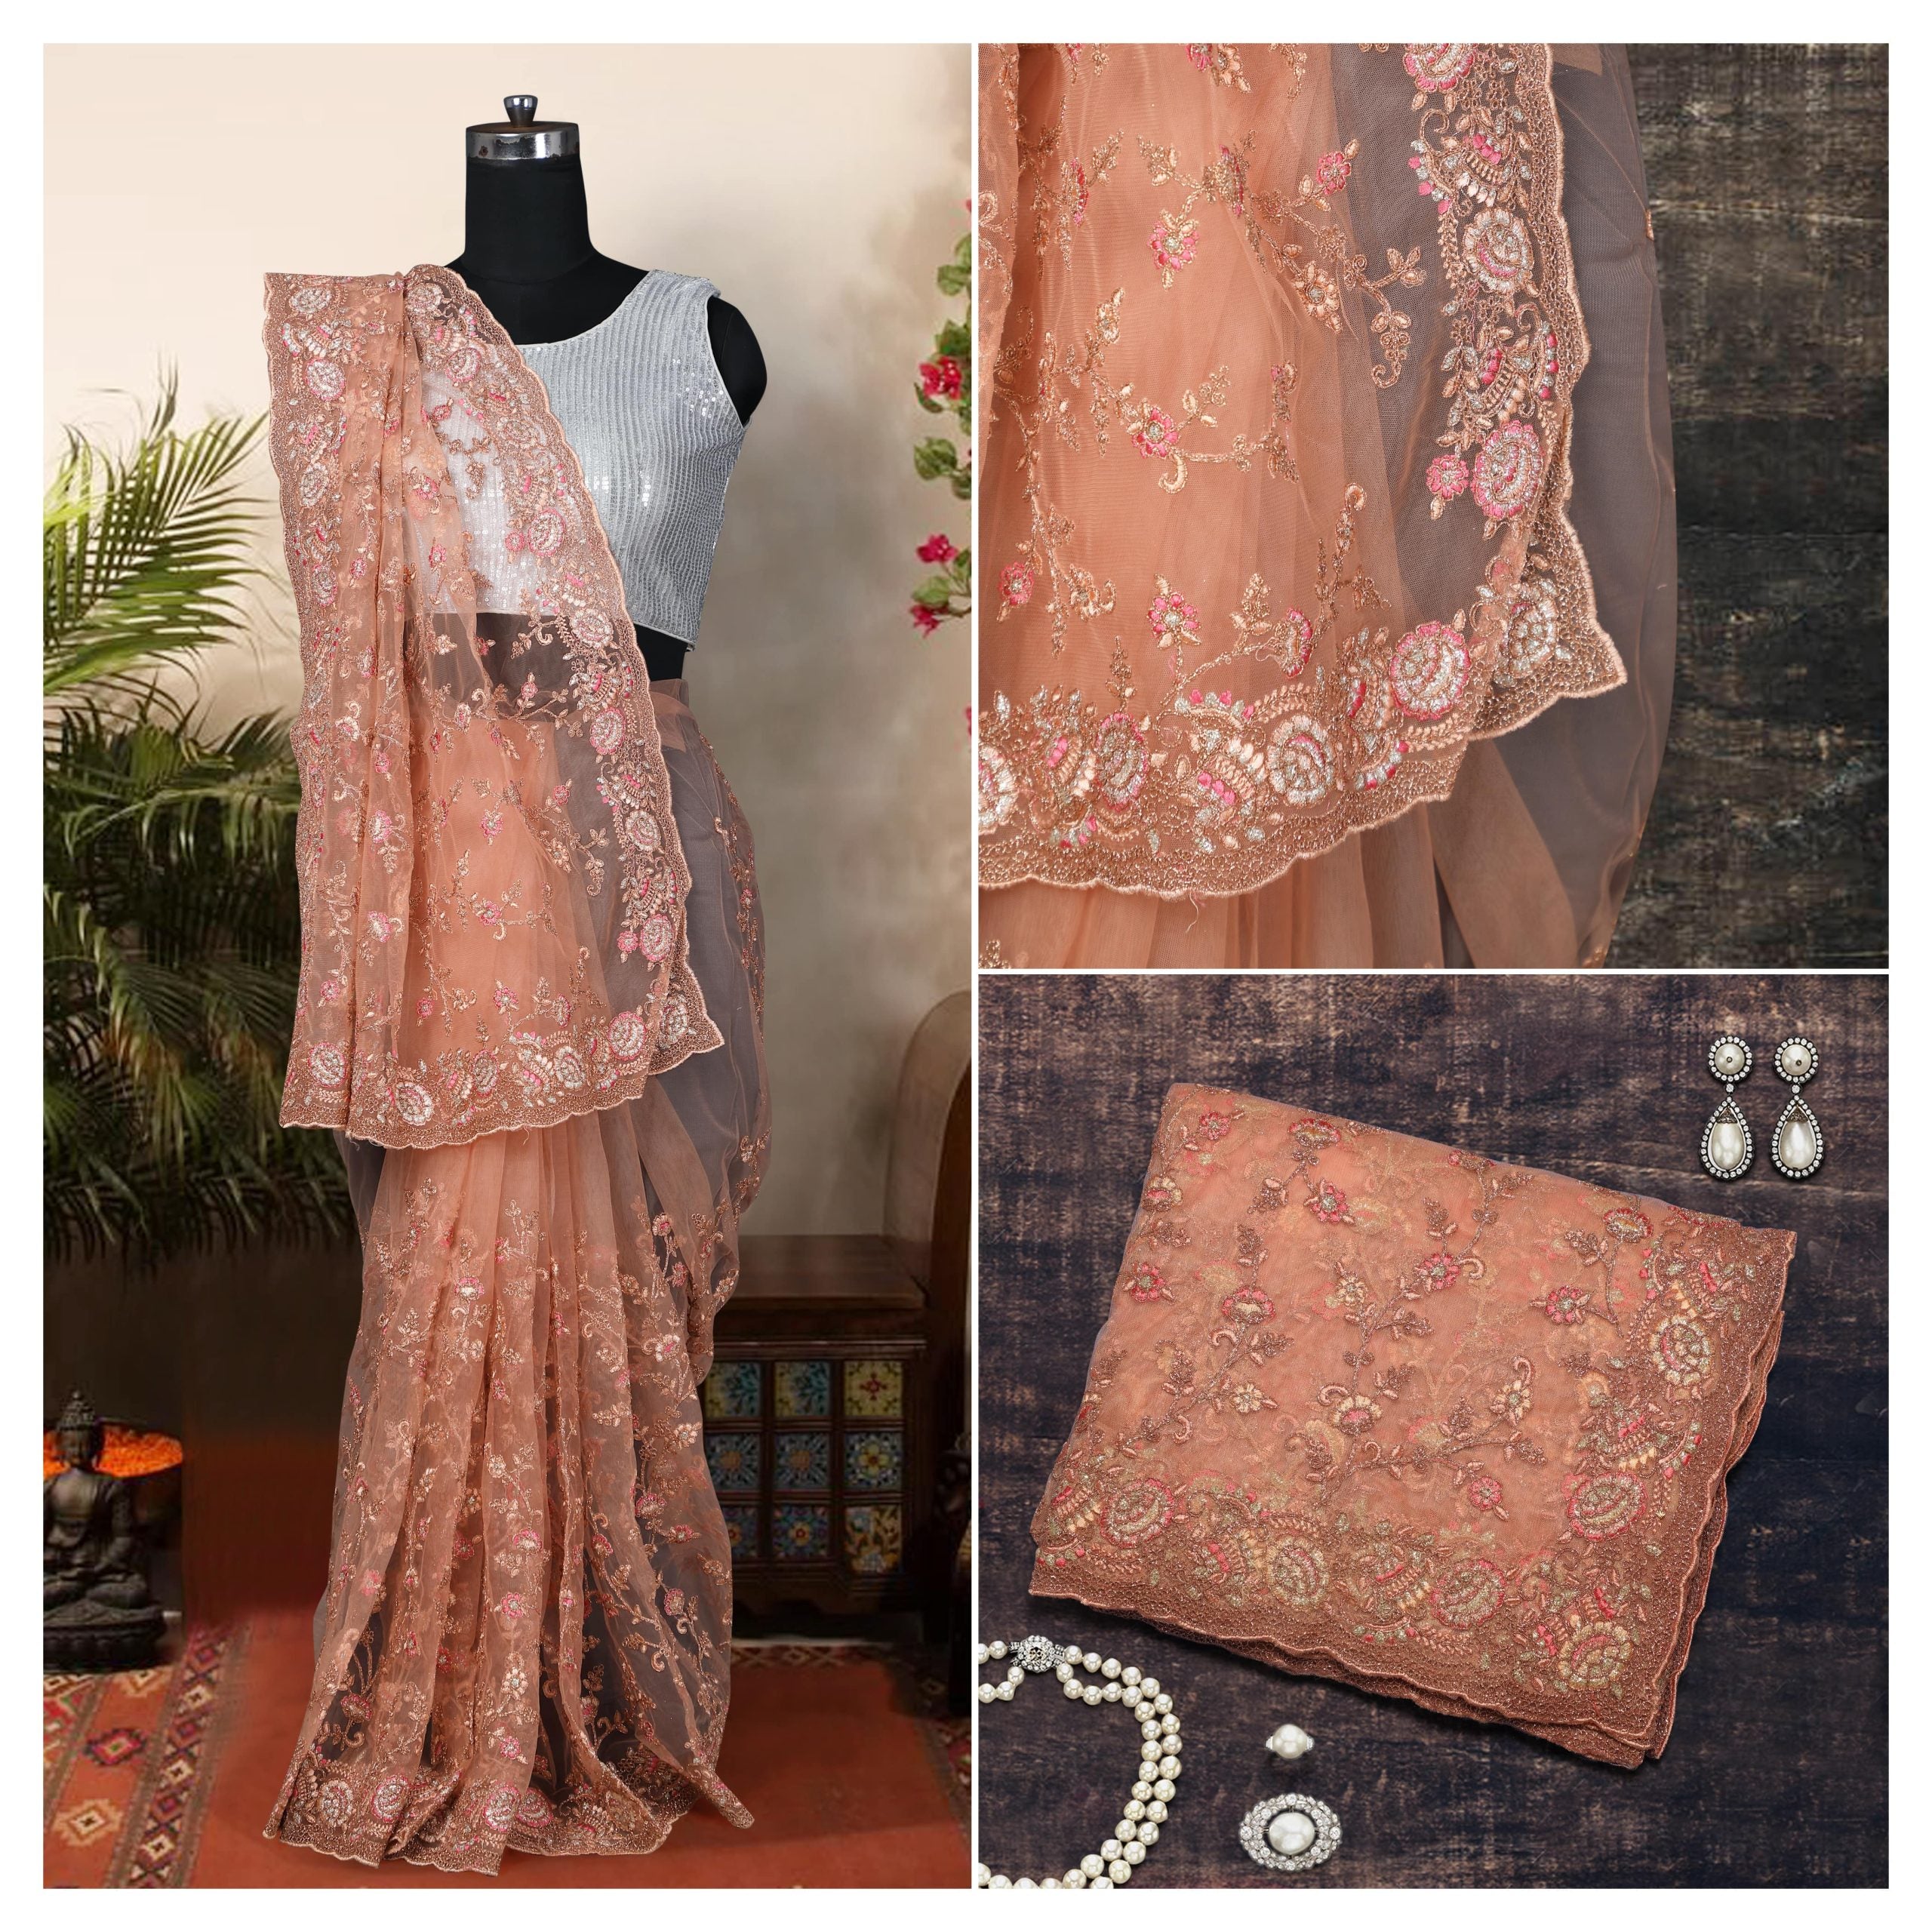 Embroidered Net Saree in Peach Color - (Priya Light)